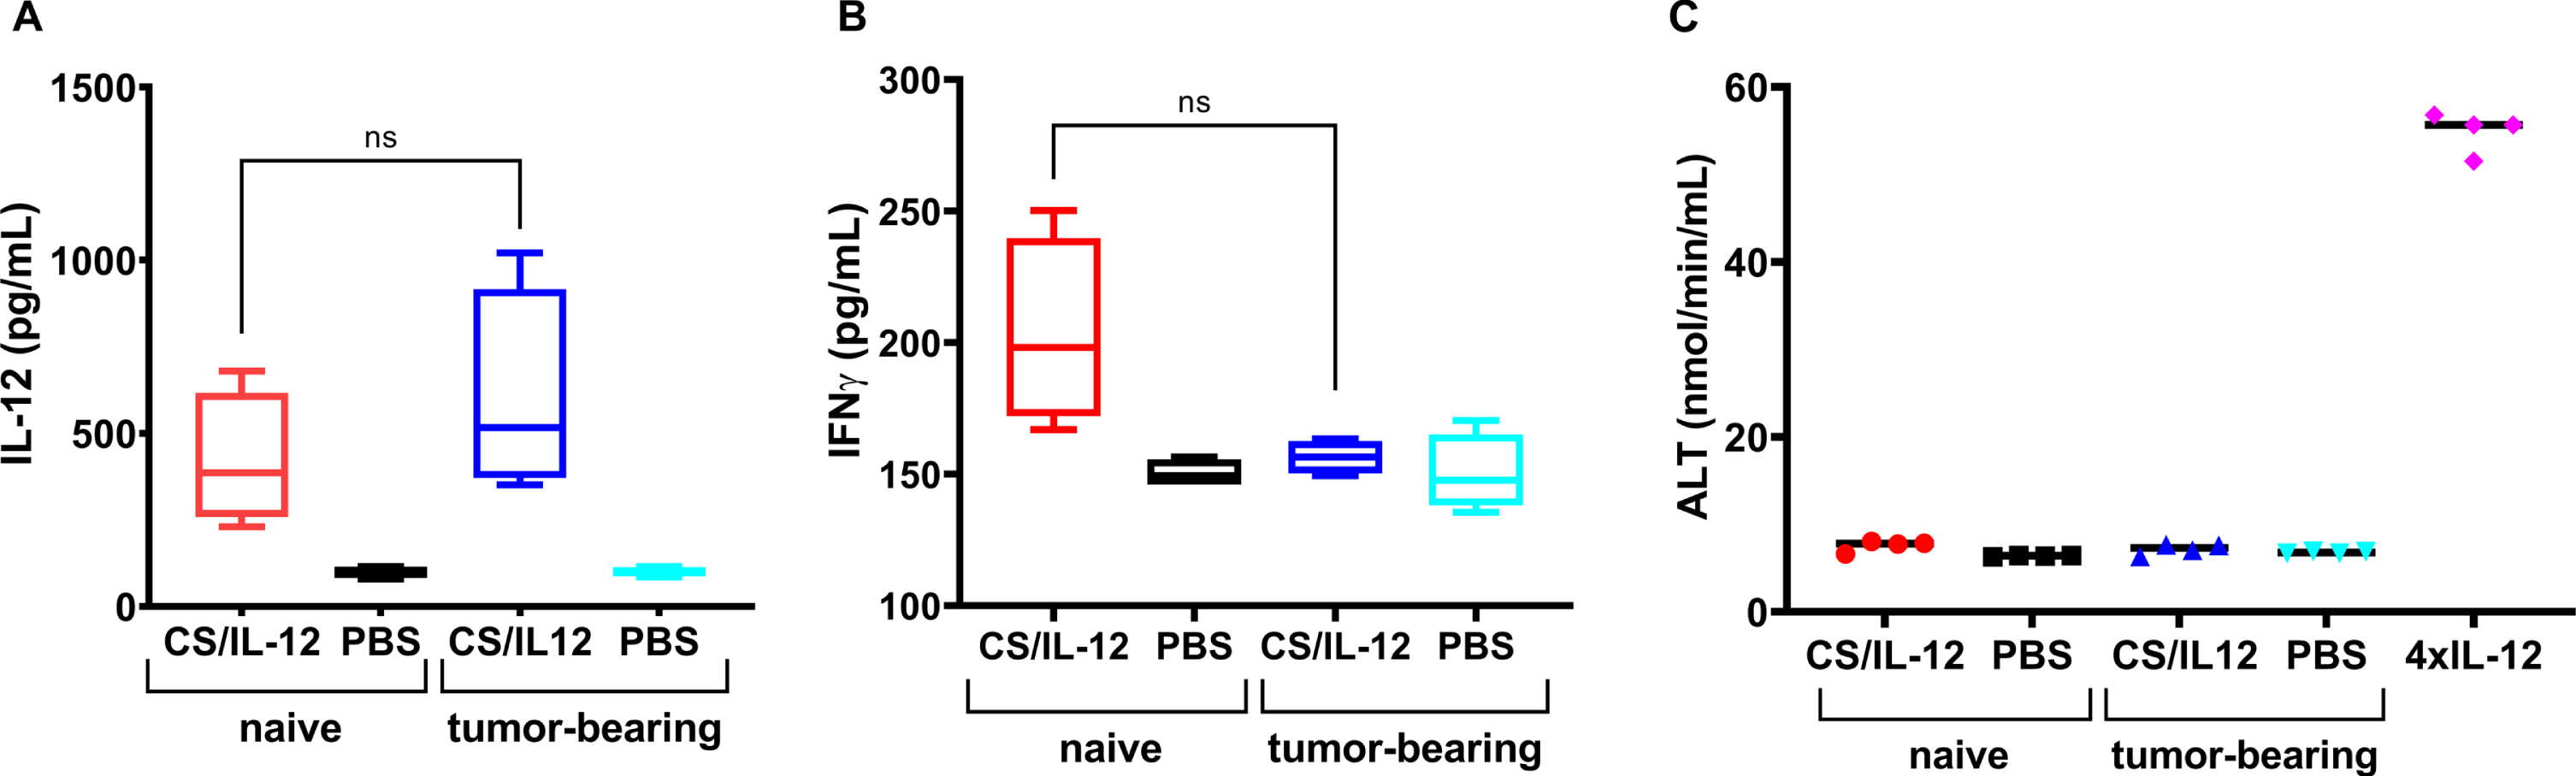 Intravesical instillations of IL-12 were released at similar rate by chitosan in naïve mice and MB49 tumor bearing mice. Naïve mice were treated intravesically with CS/IL-12 (red bars) or PBS (black bars). MB49 tumor-bearing mice were treated intravesically with CS/IL-12 (blue bars) or PBS (cyan bars). Serum levels of IL-12 at 6 hrs after treatment (A) or IFN-γ at 48 hrs after treatment (B) were measured via ELISA. Hepatotoxicity at 48 hrs after treatment (C) was determined by measuring ALT activity in the sera of naïve and MB49 tumor-bearing mice receiving intravesial CS/IL-12 or PBS. Naïve mice treated with four consecutive daily doses of i.p. IL-12 (1μg) served as a positive control of hepatotoxicity. “ns” indicates “not significant” (p > 0.05 via t-test).